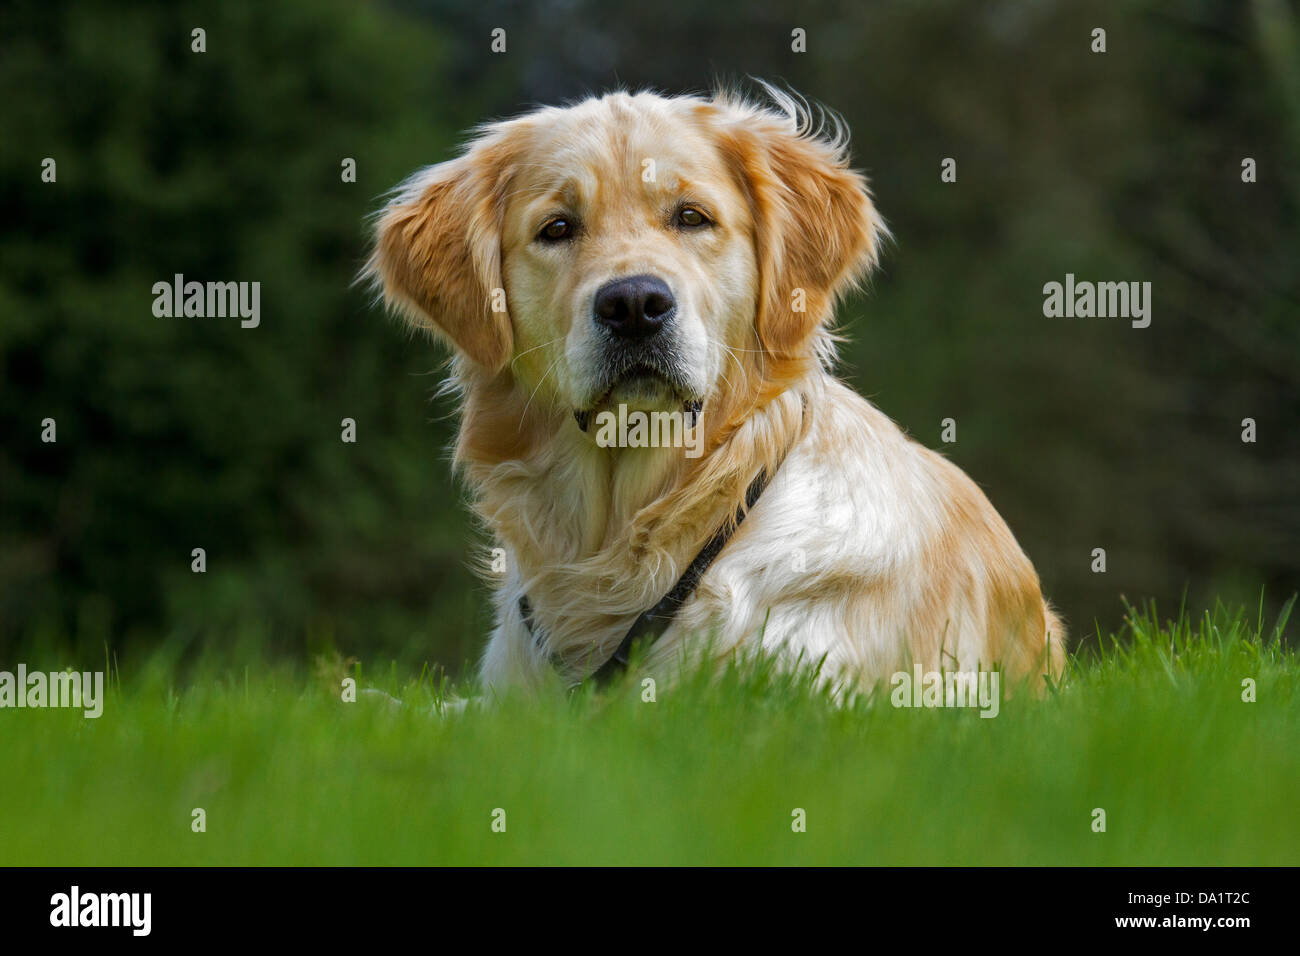 Golden retriever (Canis lupus familiaris) dog lying on lawn in garden Banque D'Images